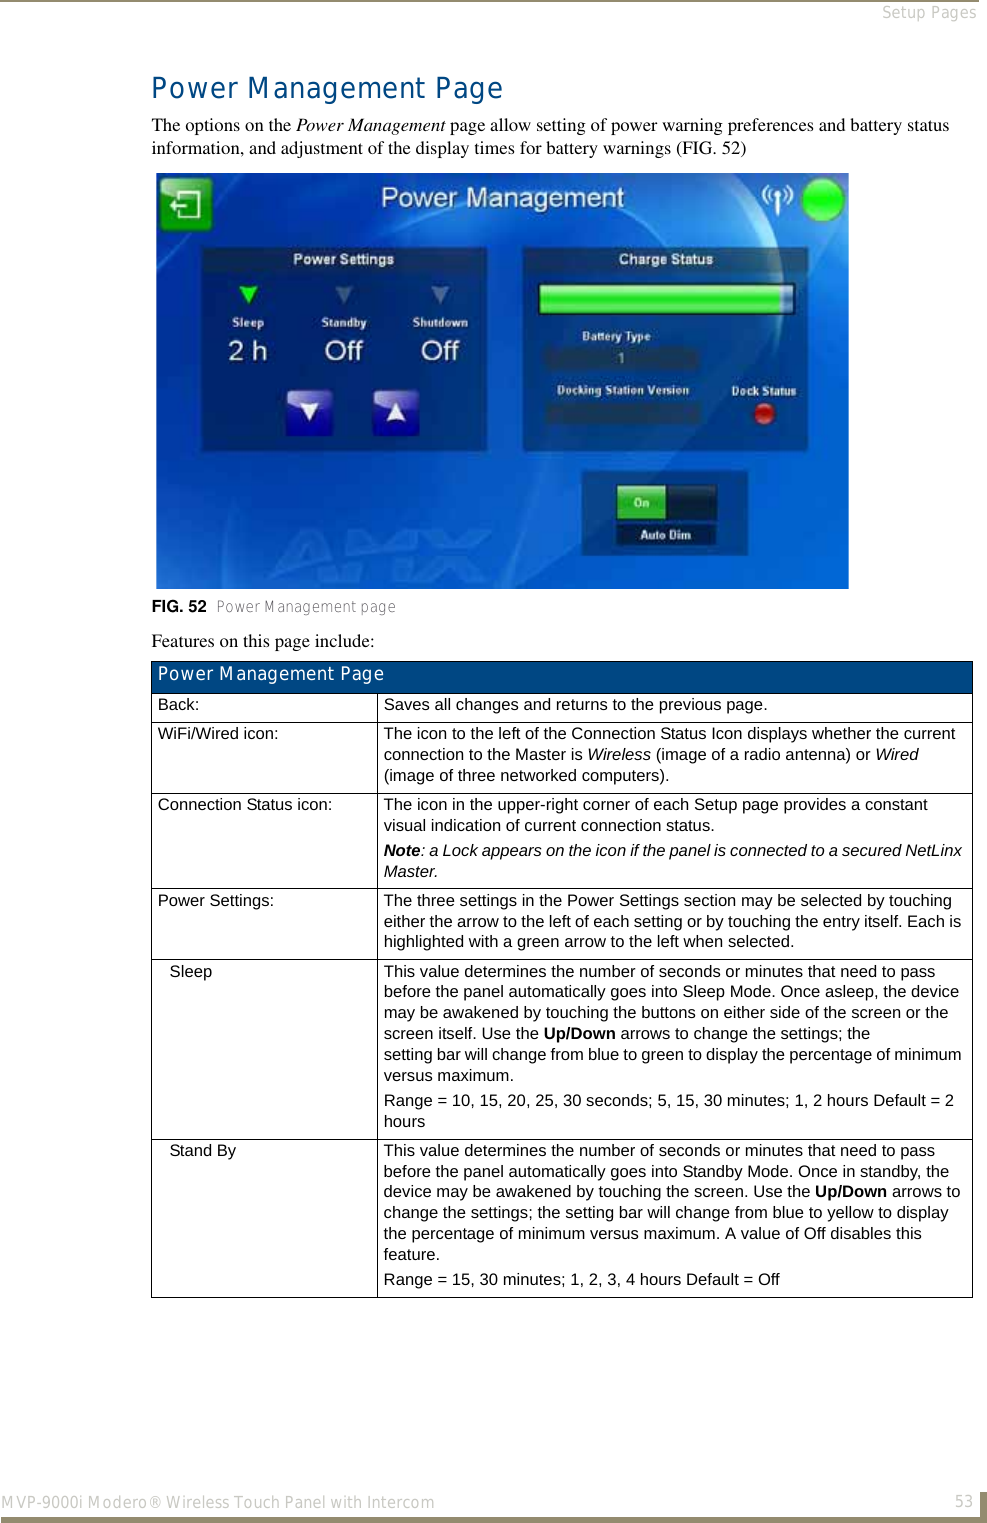 Setup Pages53MVP-9000i Modero® Wireless Touch Panel with IntercomPower Management PageThe options on the Power Management page allow setting of power warning preferences and battery status information, and adjustment of the display times for battery warnings (FIG. 52)  Features on this page include:  FIG. 52  Power Management page Power Management PageBack: Saves all changes and returns to the previous page.WiFi/Wired icon: The icon to the left of the Connection Status Icon displays whether the current connection to the Master is Wireless (image of a radio antenna) or Wired (image of three networked computers).Connection Status icon: The icon in the upper-right corner of each Setup page provides a constant visual indication of current connection status.Note: a Lock appears on the icon if the panel is connected to a secured NetLinx Master.Power Settings: The three settings in the Power Settings section may be selected by touching either the arrow to the left of each setting or by touching the entry itself. Each is highlighted with a green arrow to the left when selected. Sleep This value determines the number of seconds or minutes that need to pass before the panel automatically goes into Sleep Mode. Once asleep, the device may be awakened by touching the buttons on either side of the screen or the screen itself. Use the Up/Down arrows to change the settings; the setting bar will change from blue to green to display the percentage of minimum versus maximum. Range = 10, 15, 20, 25, 30 seconds; 5, 15, 30 minutes; 1, 2 hours Default = 2 hoursStand By This value determines the number of seconds or minutes that need to pass before the panel automatically goes into Standby Mode. Once in standby, the device may be awakened by touching the screen. Use the Up/Down arrows to change the settings; the setting bar will change from blue to yellow to display the percentage of minimum versus maximum. A value of Off disables this feature.Range = 15, 30 minutes; 1, 2, 3, 4 hours Default = Off